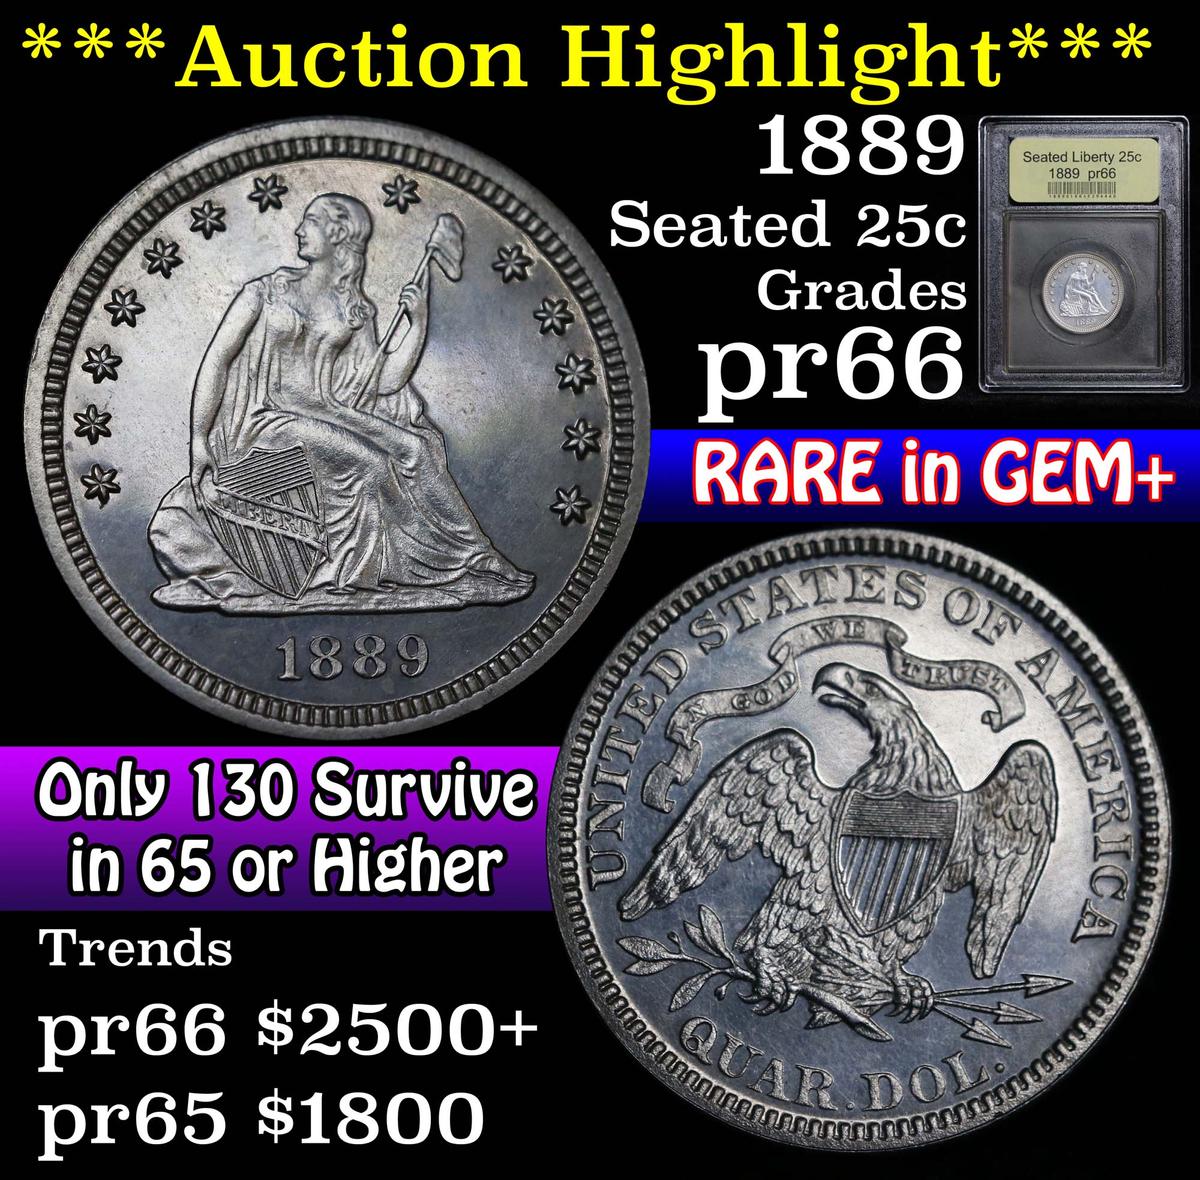 **Auction Highlight** 1889 Seated Liberty Quarter 25c Graded GEM+ Proof by USCG (fc)